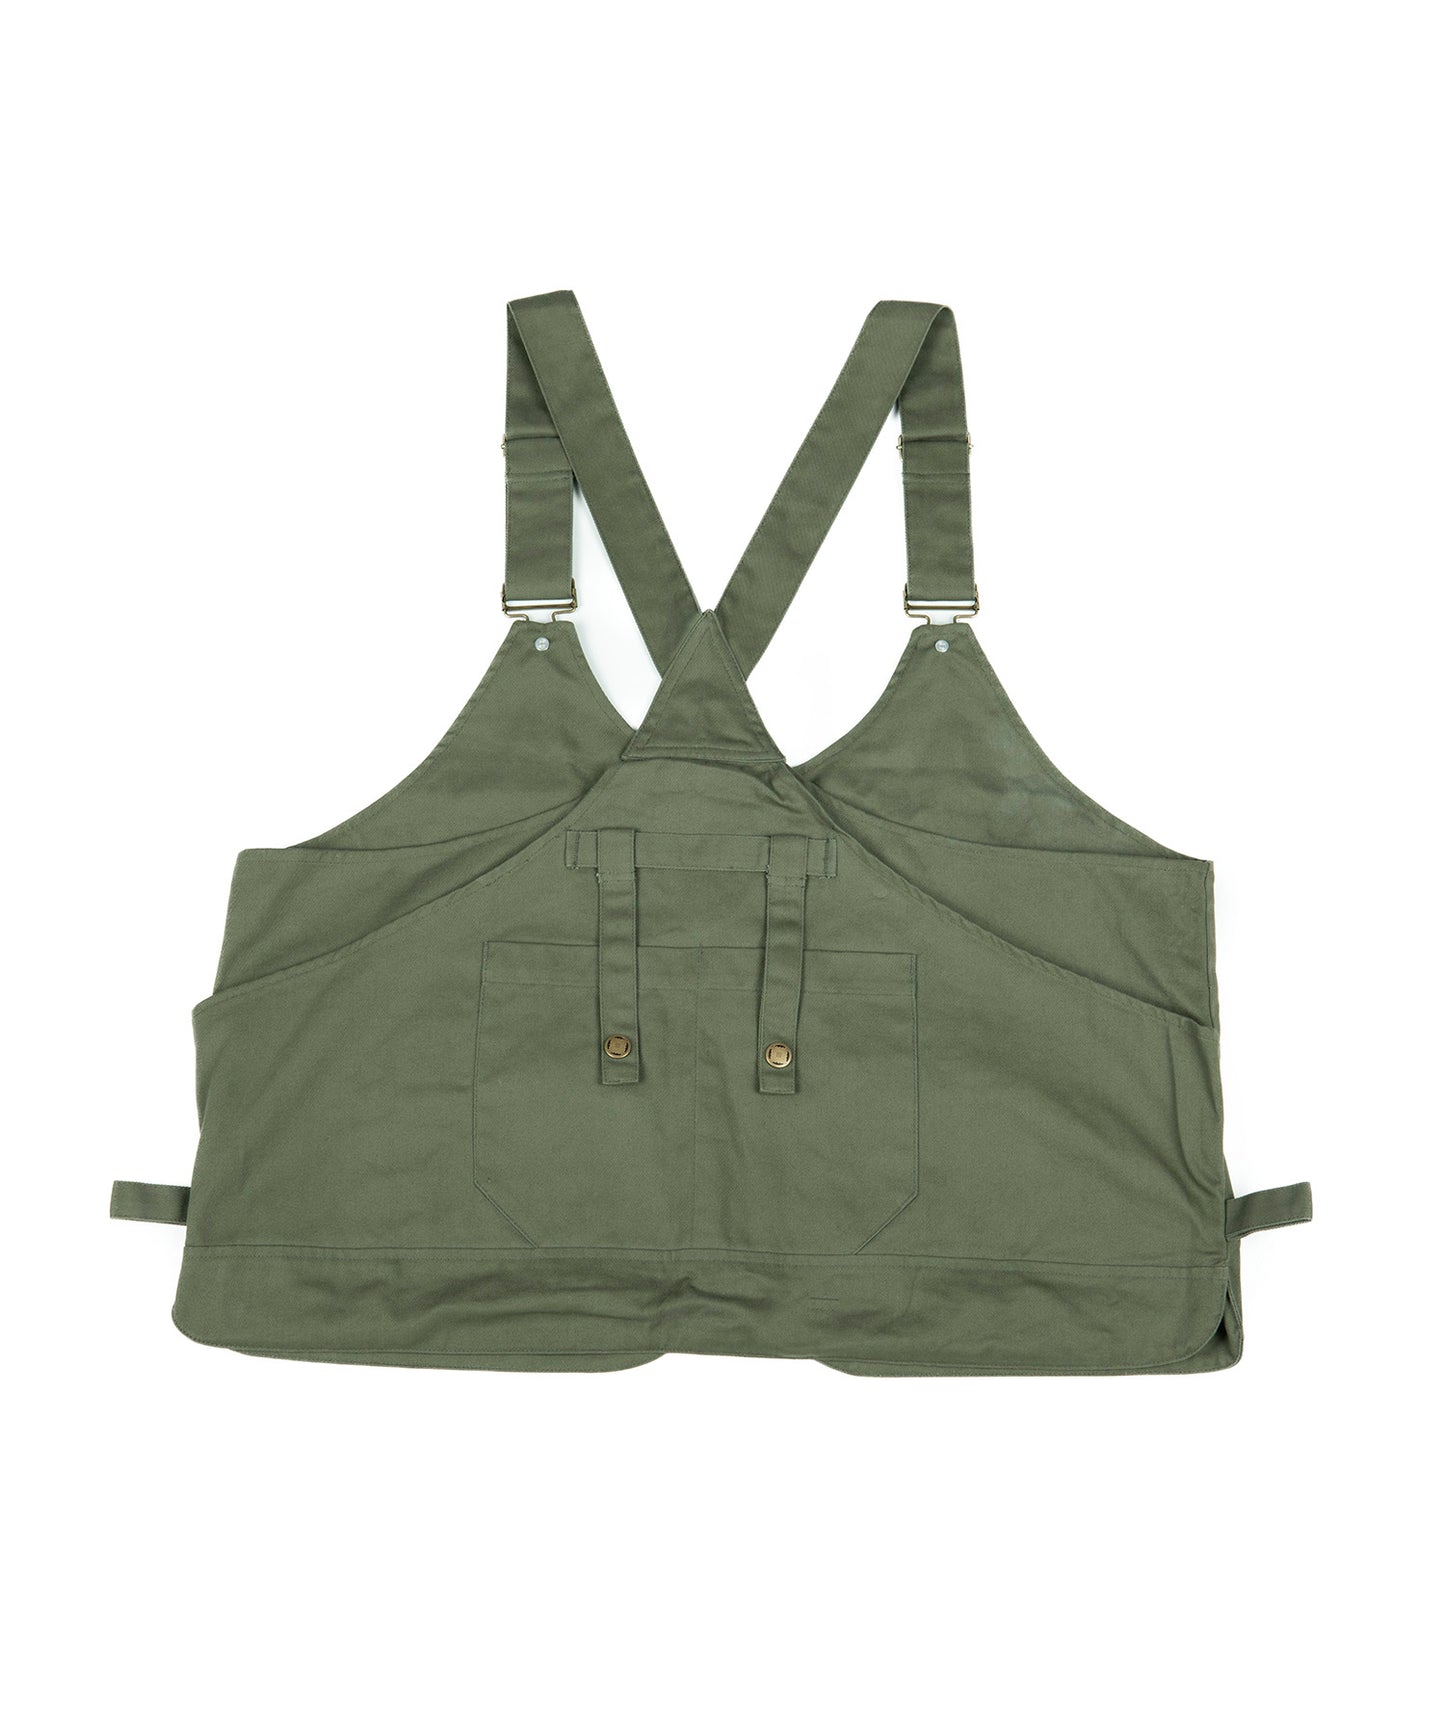 Fireproofing campvest